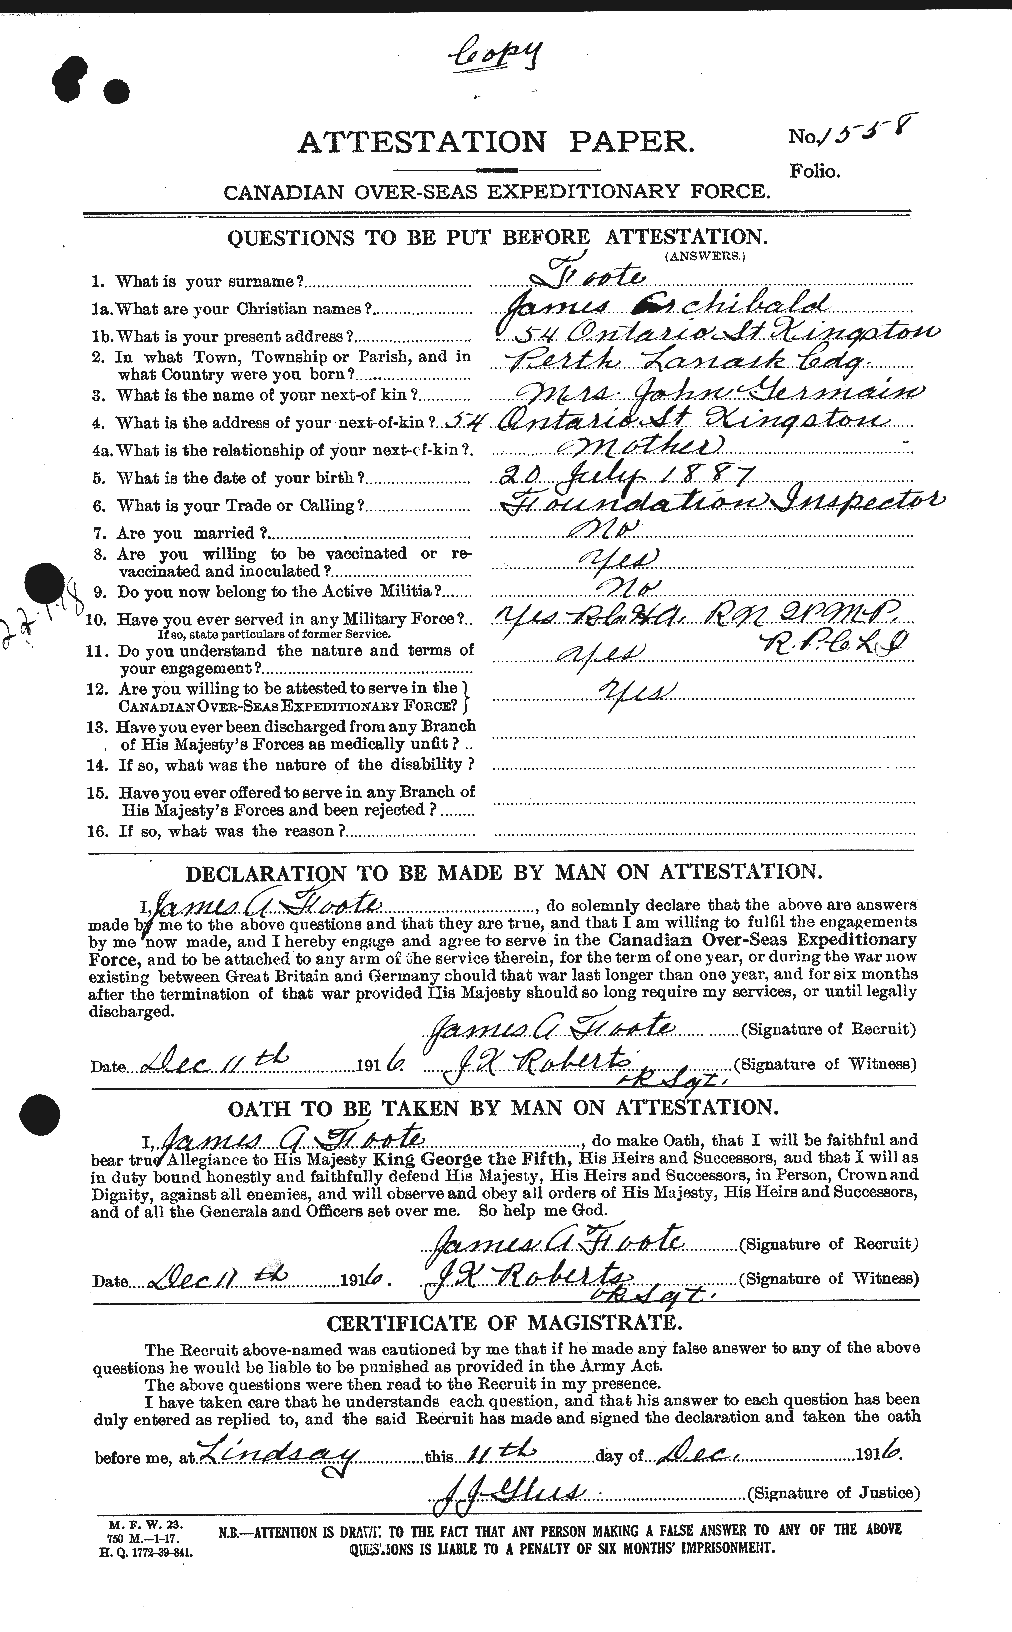 Attestation record: James Archibald Foote